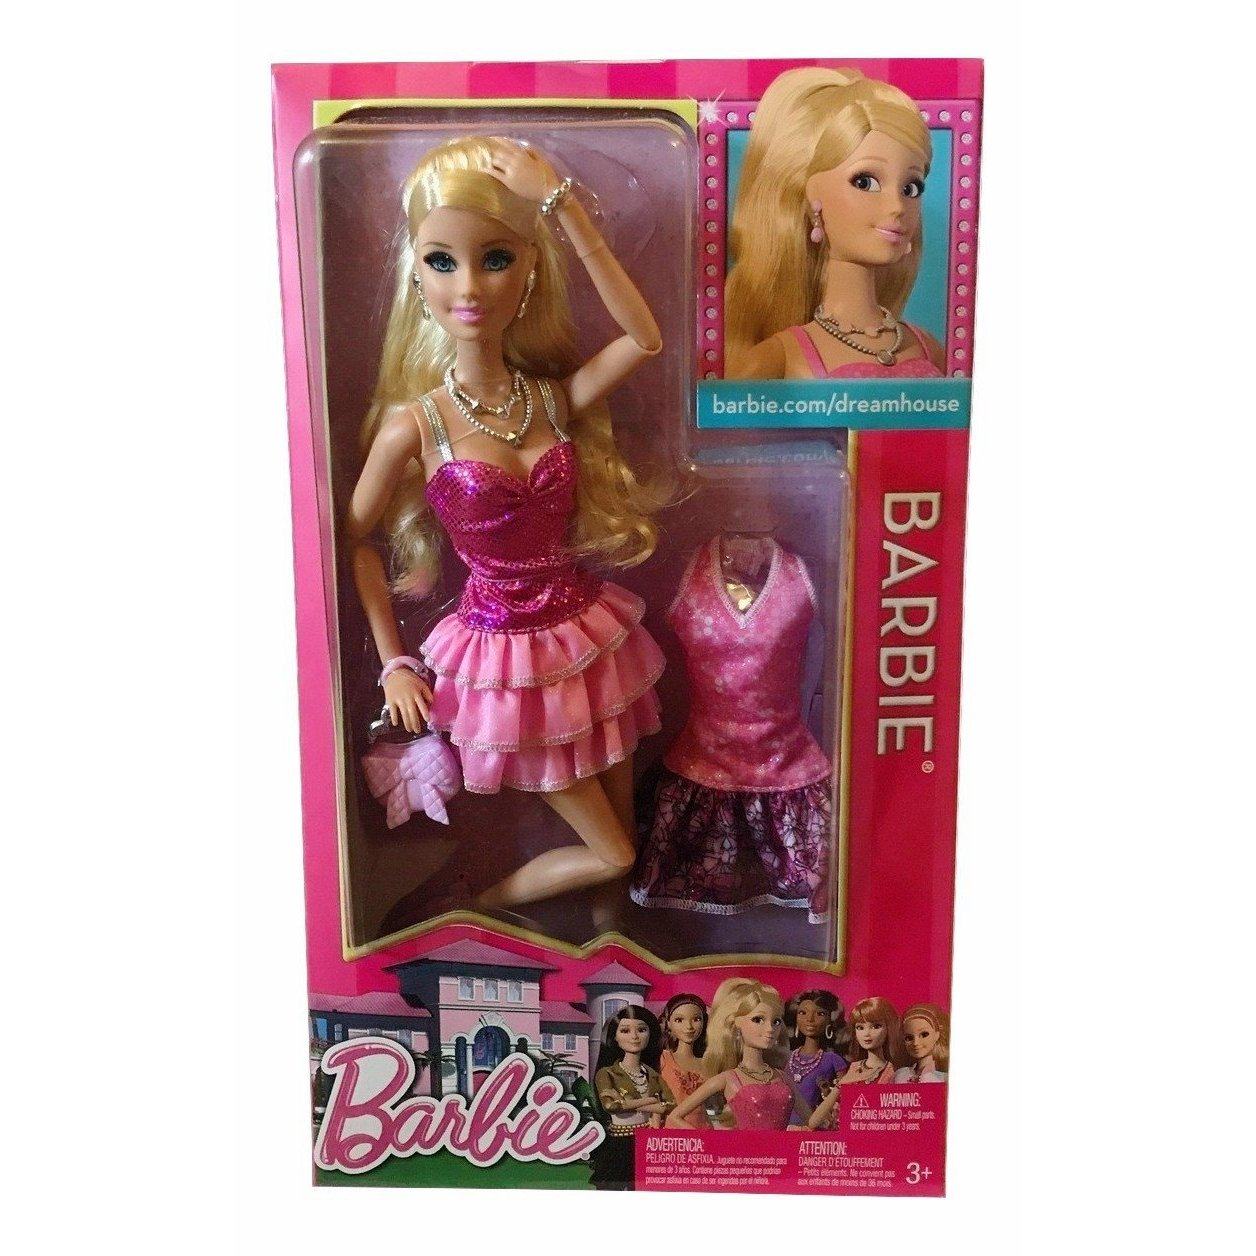 life in the dreamhouse dolls